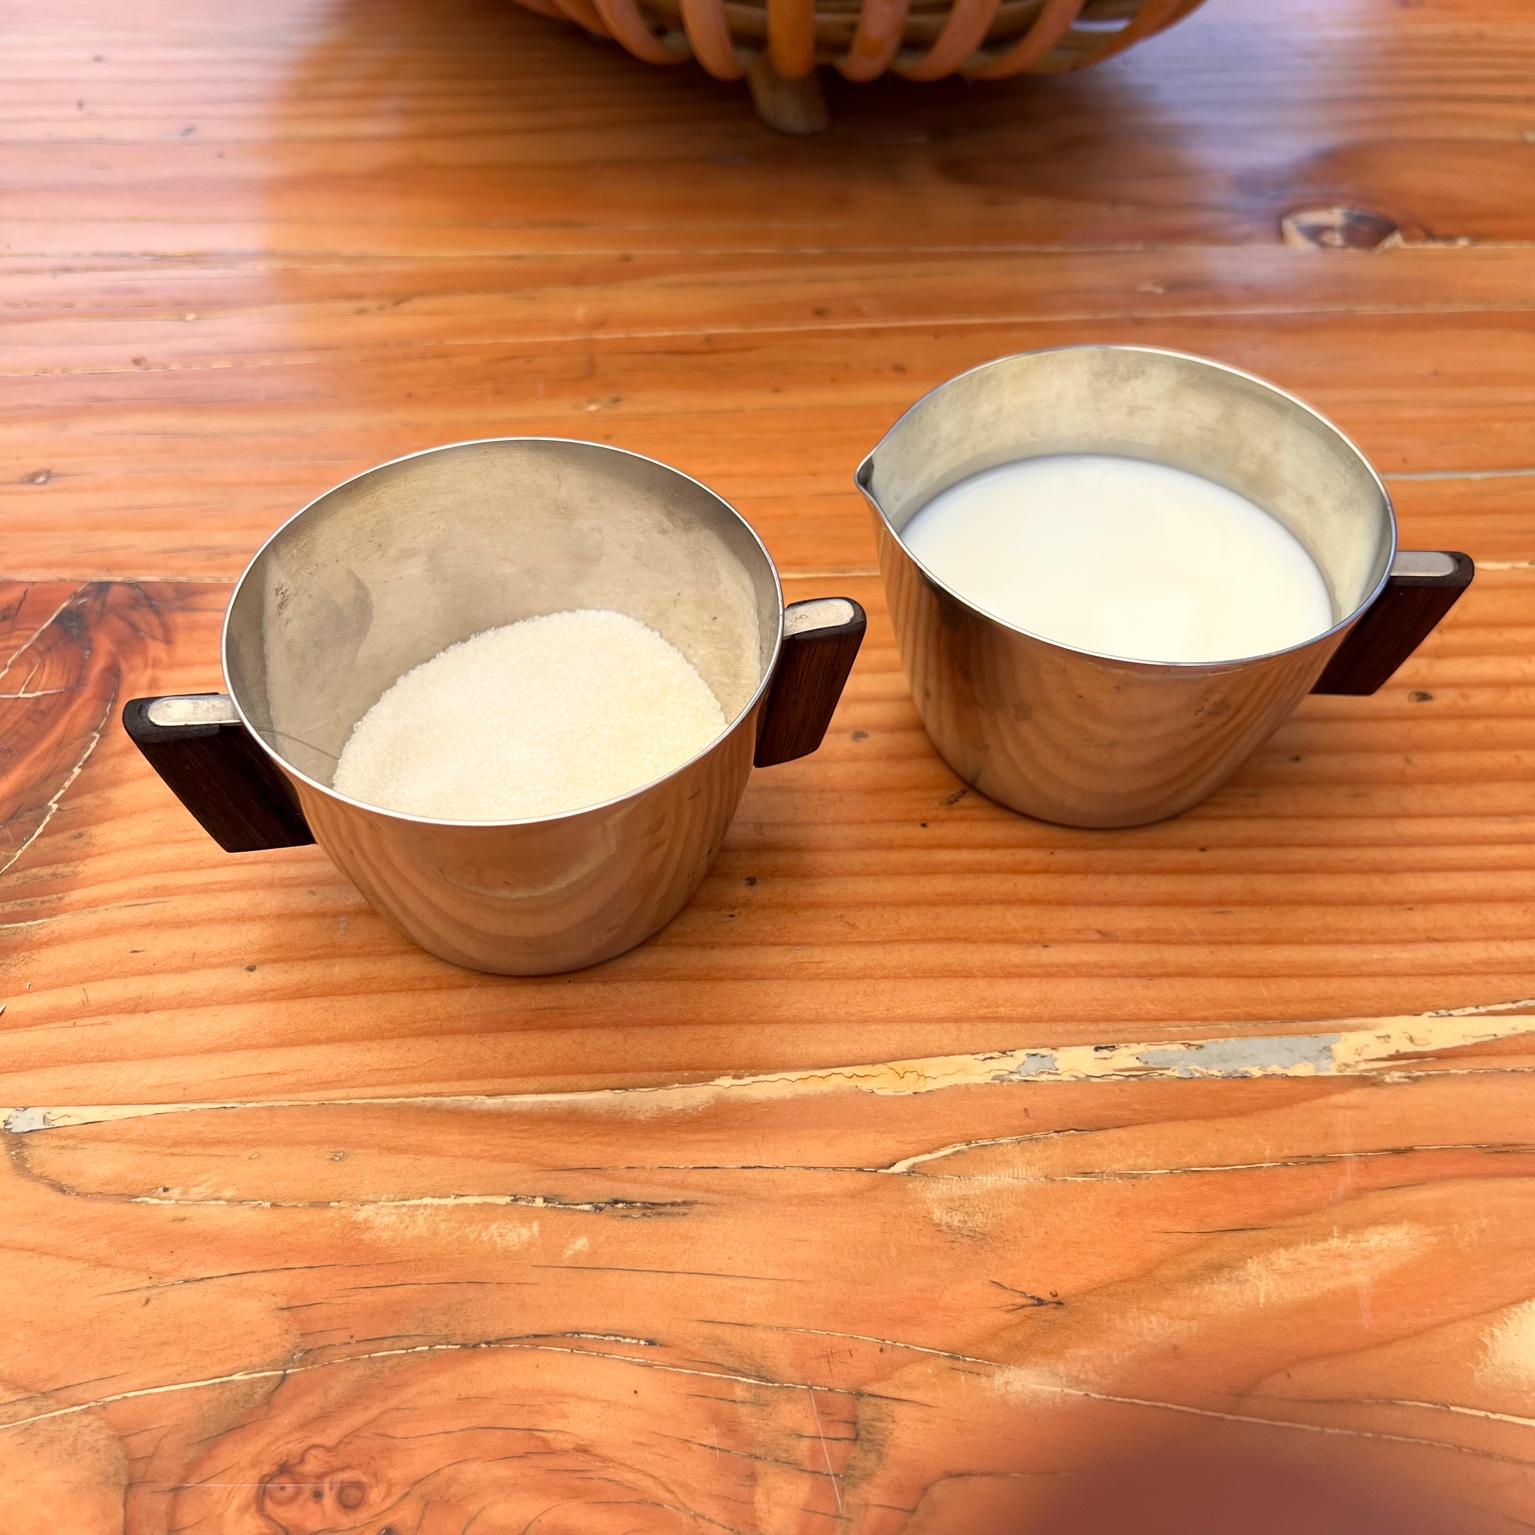 Mid-Century Modern 1970s by MCH Stainless Sugar & Creamer Set Exotic Wood Handle Denmark For Sale